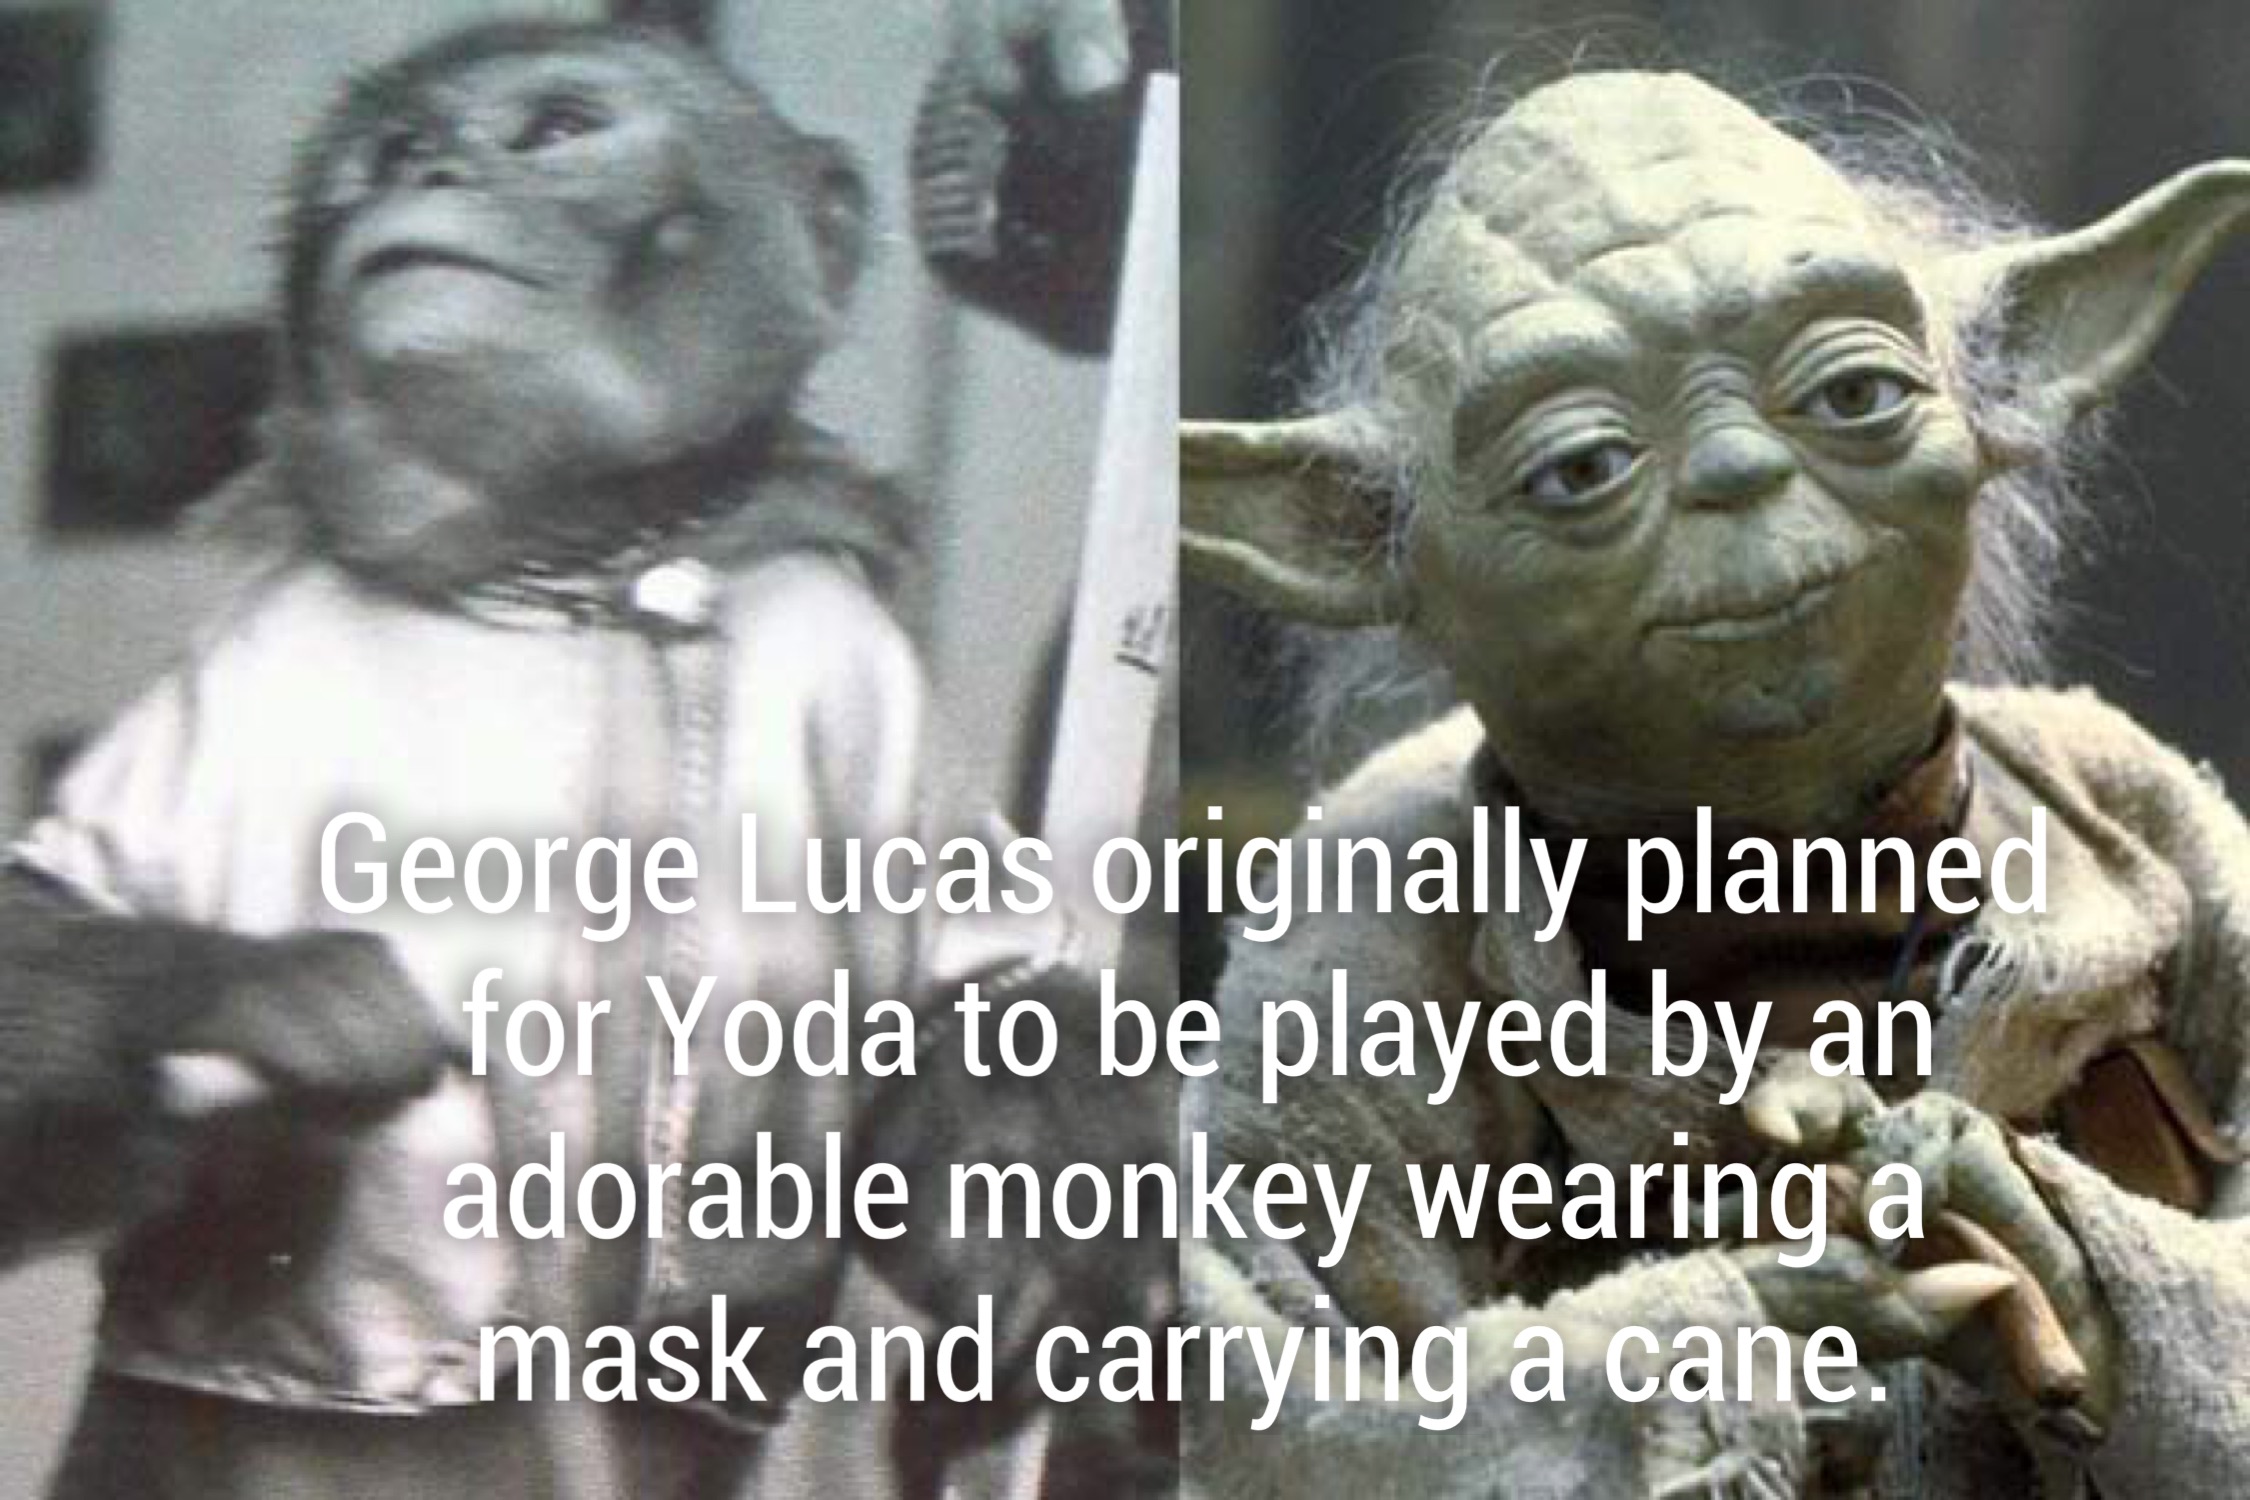 star wars man - George Lucas originally planned for Yoda to be played by an' adorable monkey wearing a Samask and carrying a cane.